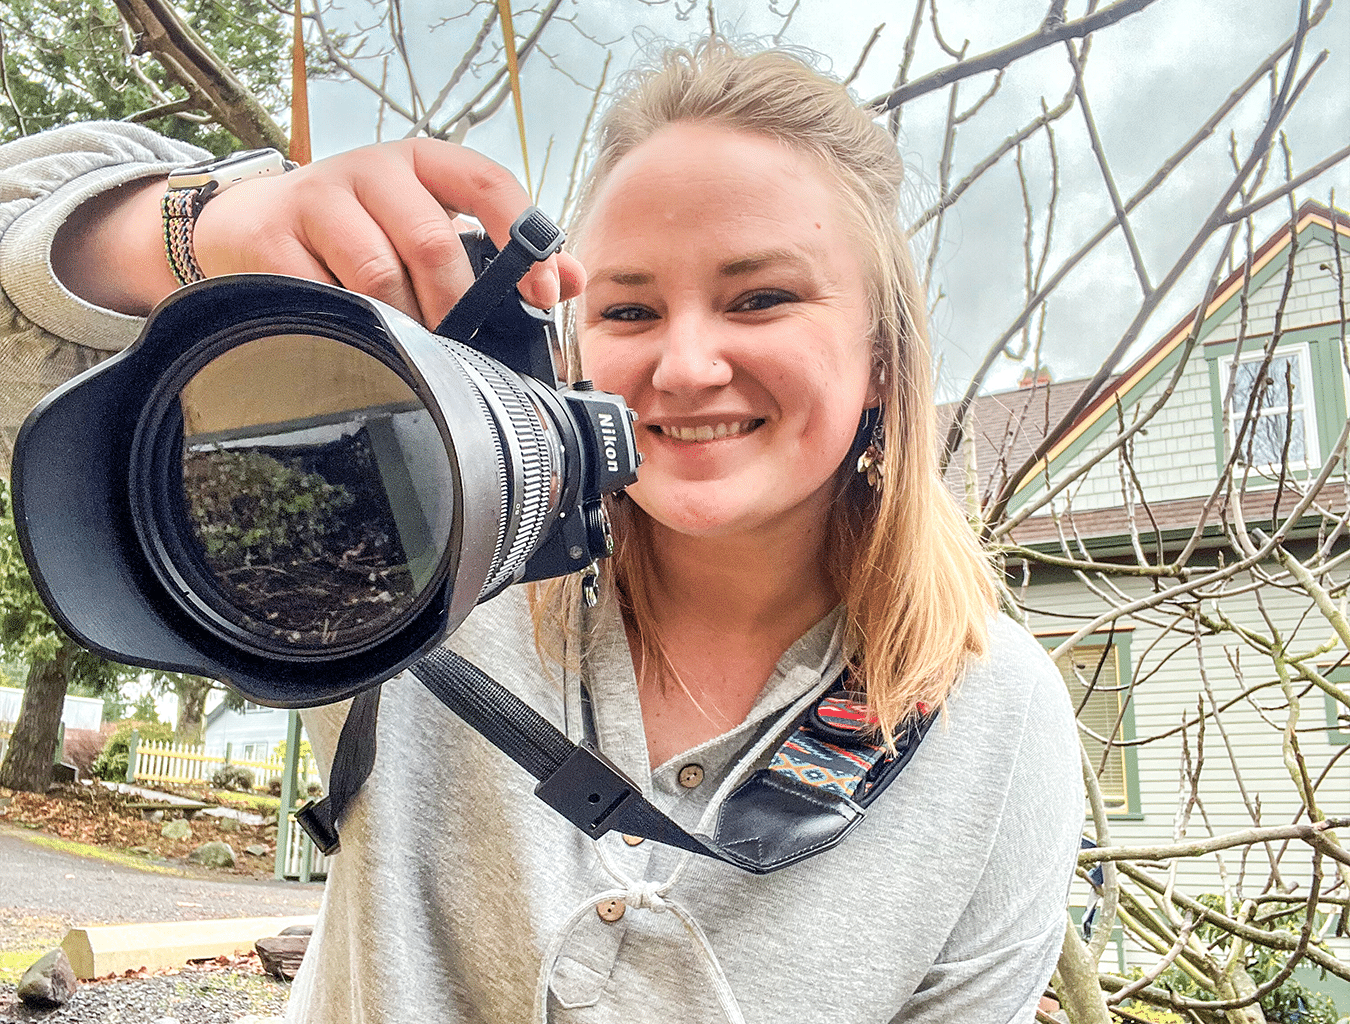 blonde woman holding a camera and smiling